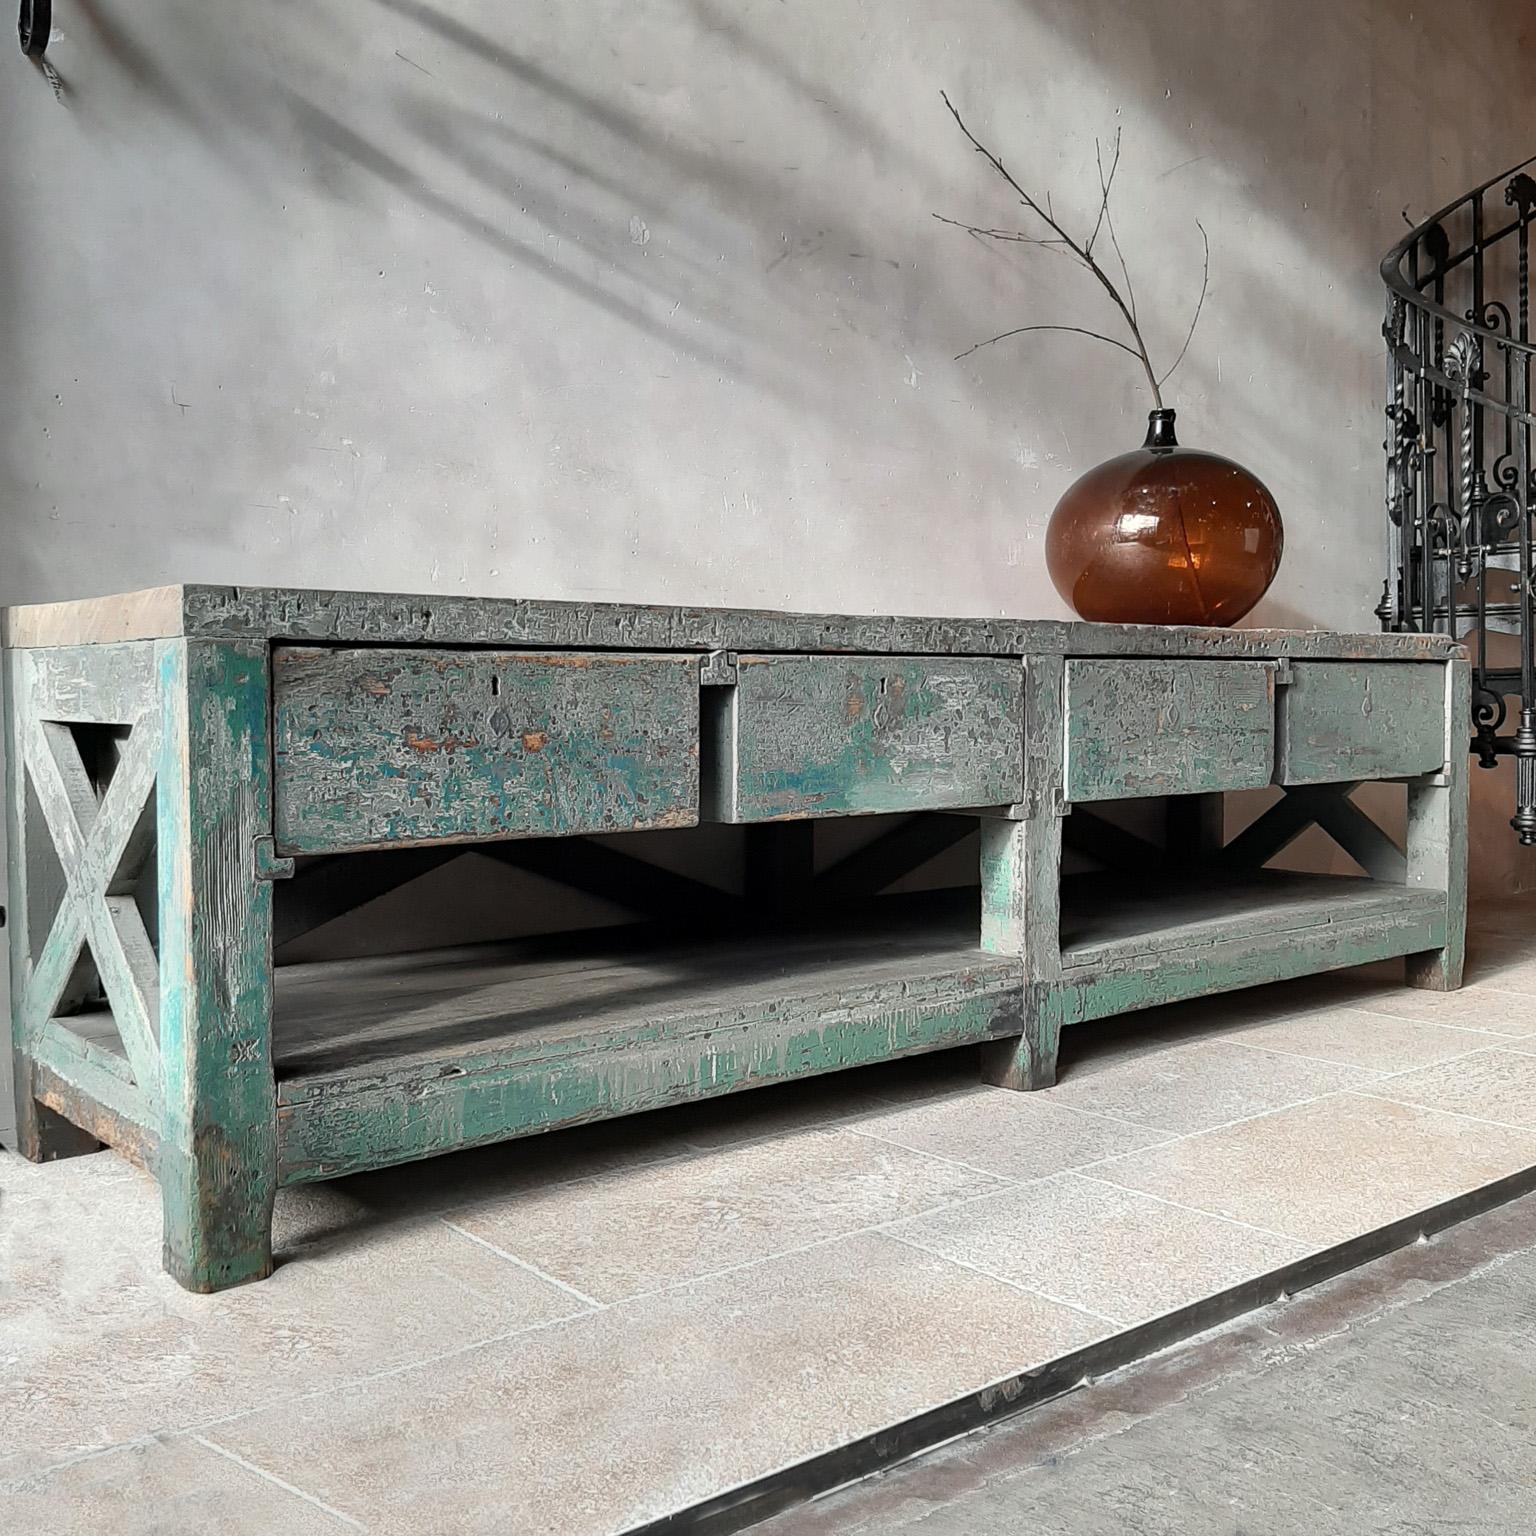 Very large Dutch workbench from the 1950s with original old paint remnants. A beautiful and very strong pine construction with diagonal crosses and 4 deep drawers. This workbench with original old green patina remains can beautifully serve as a